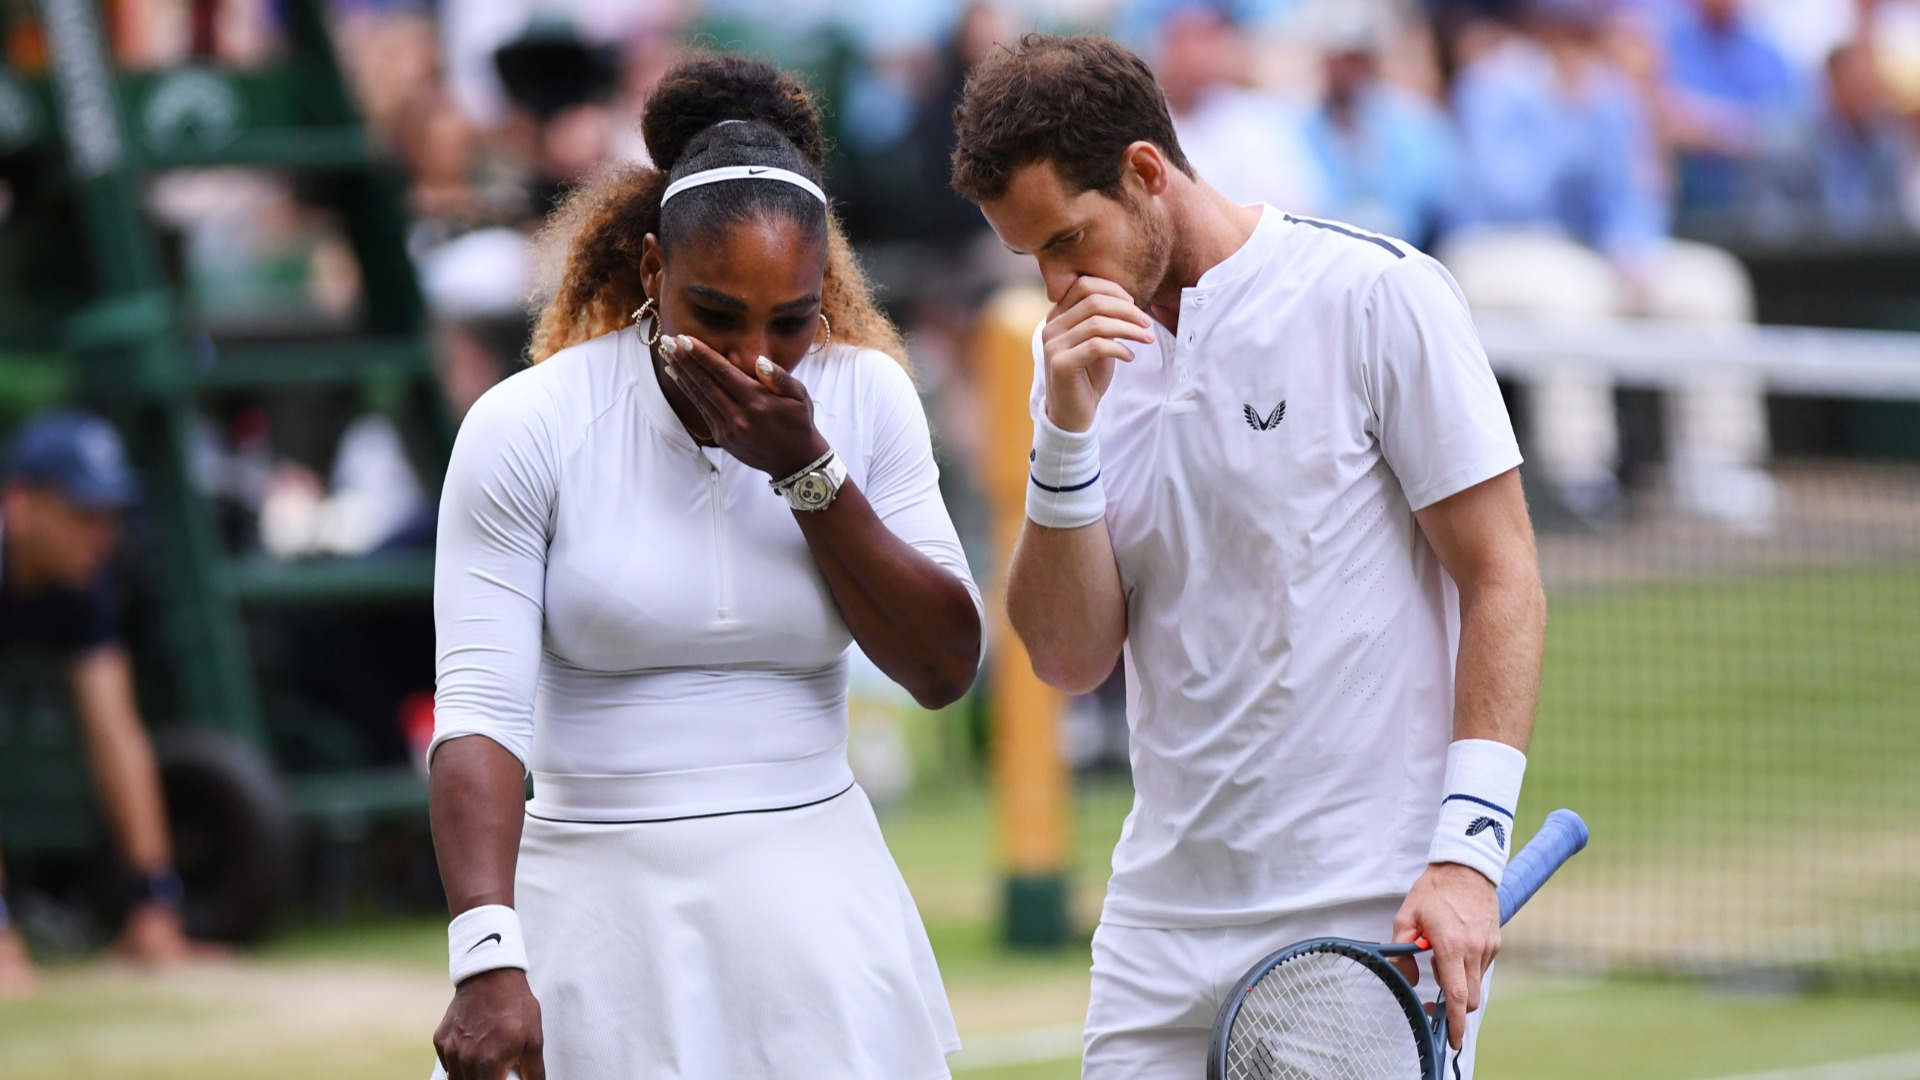 Serena, Andy Murray thrill in Wimbledon mixed doubles | Sporting News1920 x 1080